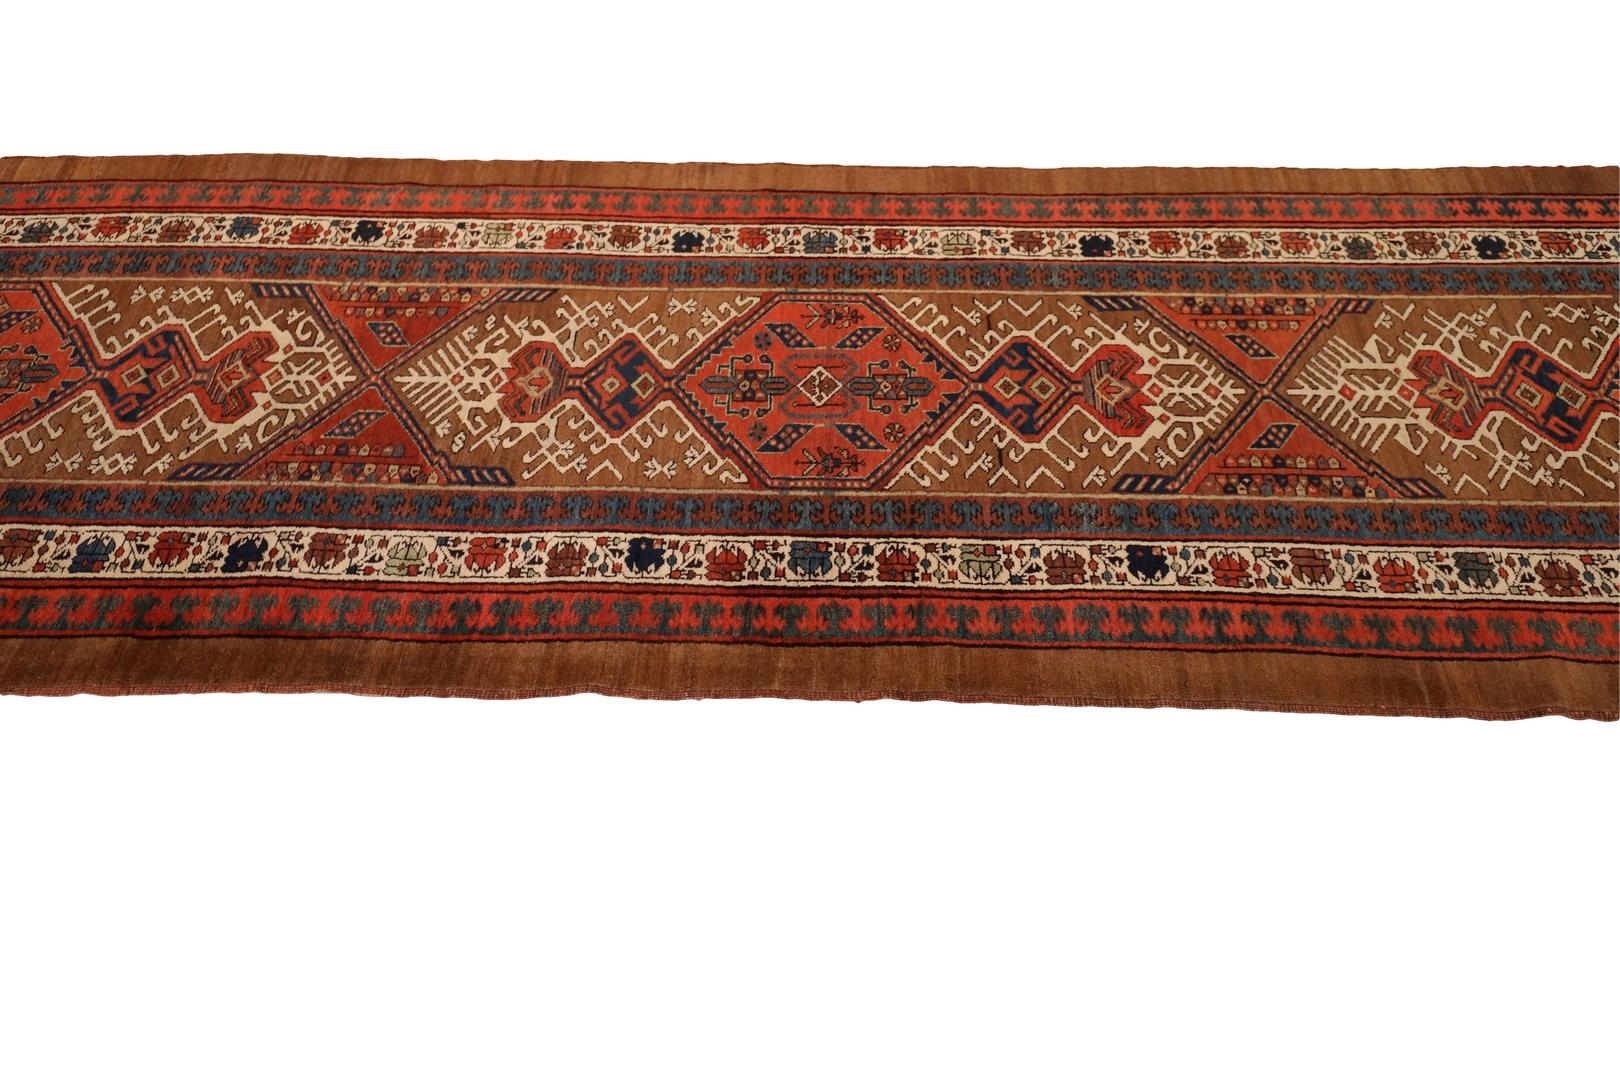 Hand-Knotted Camel-Hair Serab Antique runner - 3'8